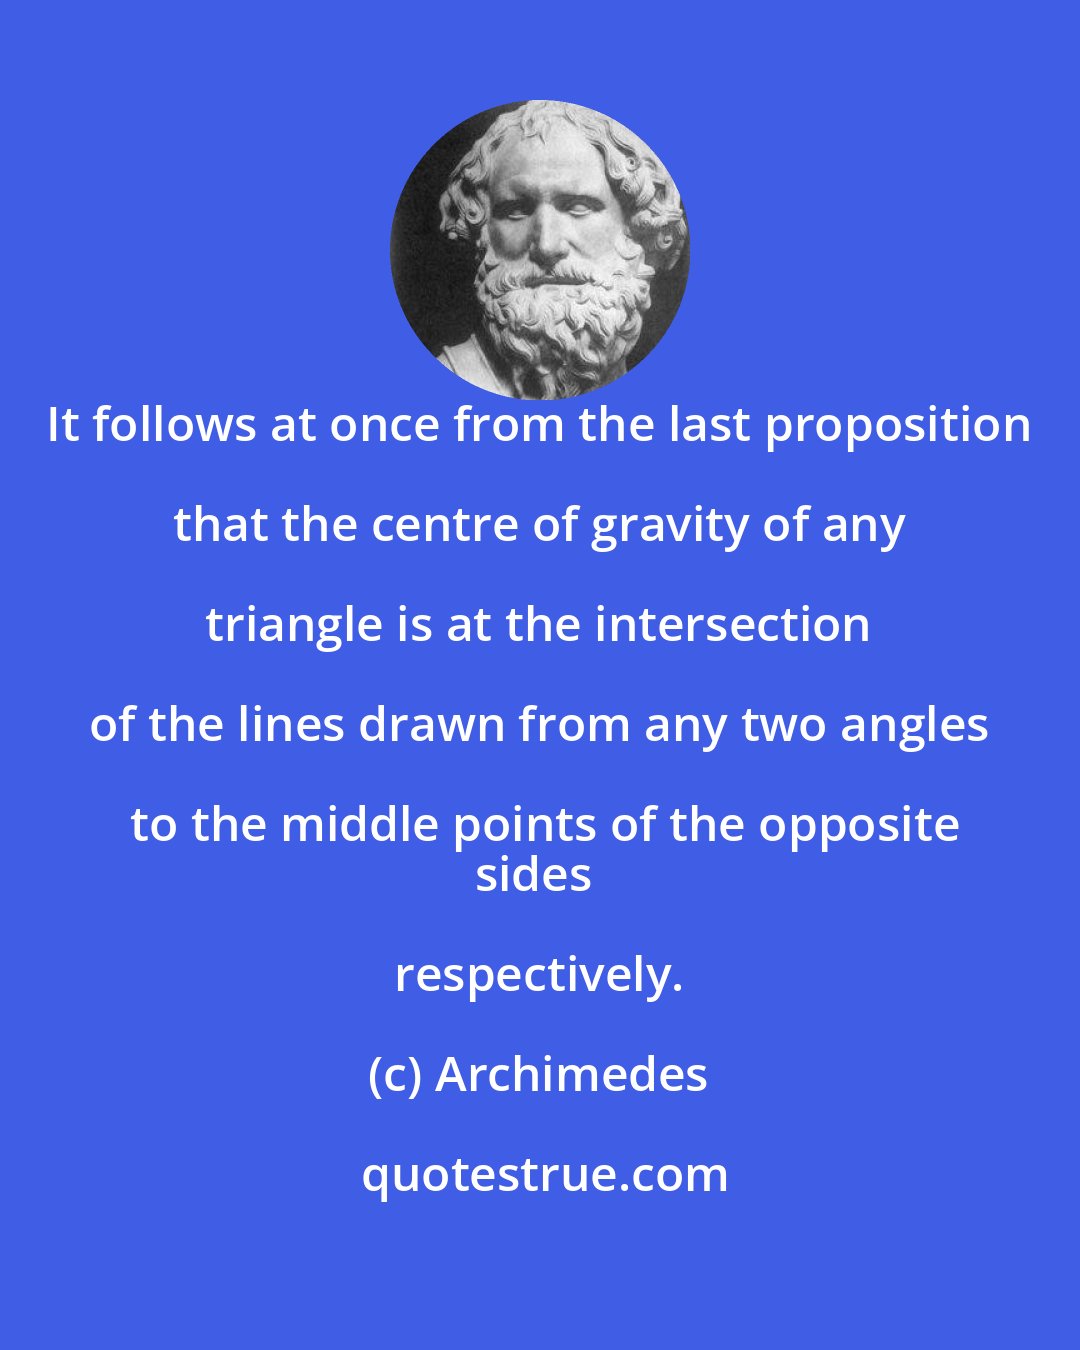 Archimedes: It follows at once from the last proposition that the centre of gravity of any triangle is at the intersection of the lines drawn from any two angles to the middle points of the opposite
sides respectively.